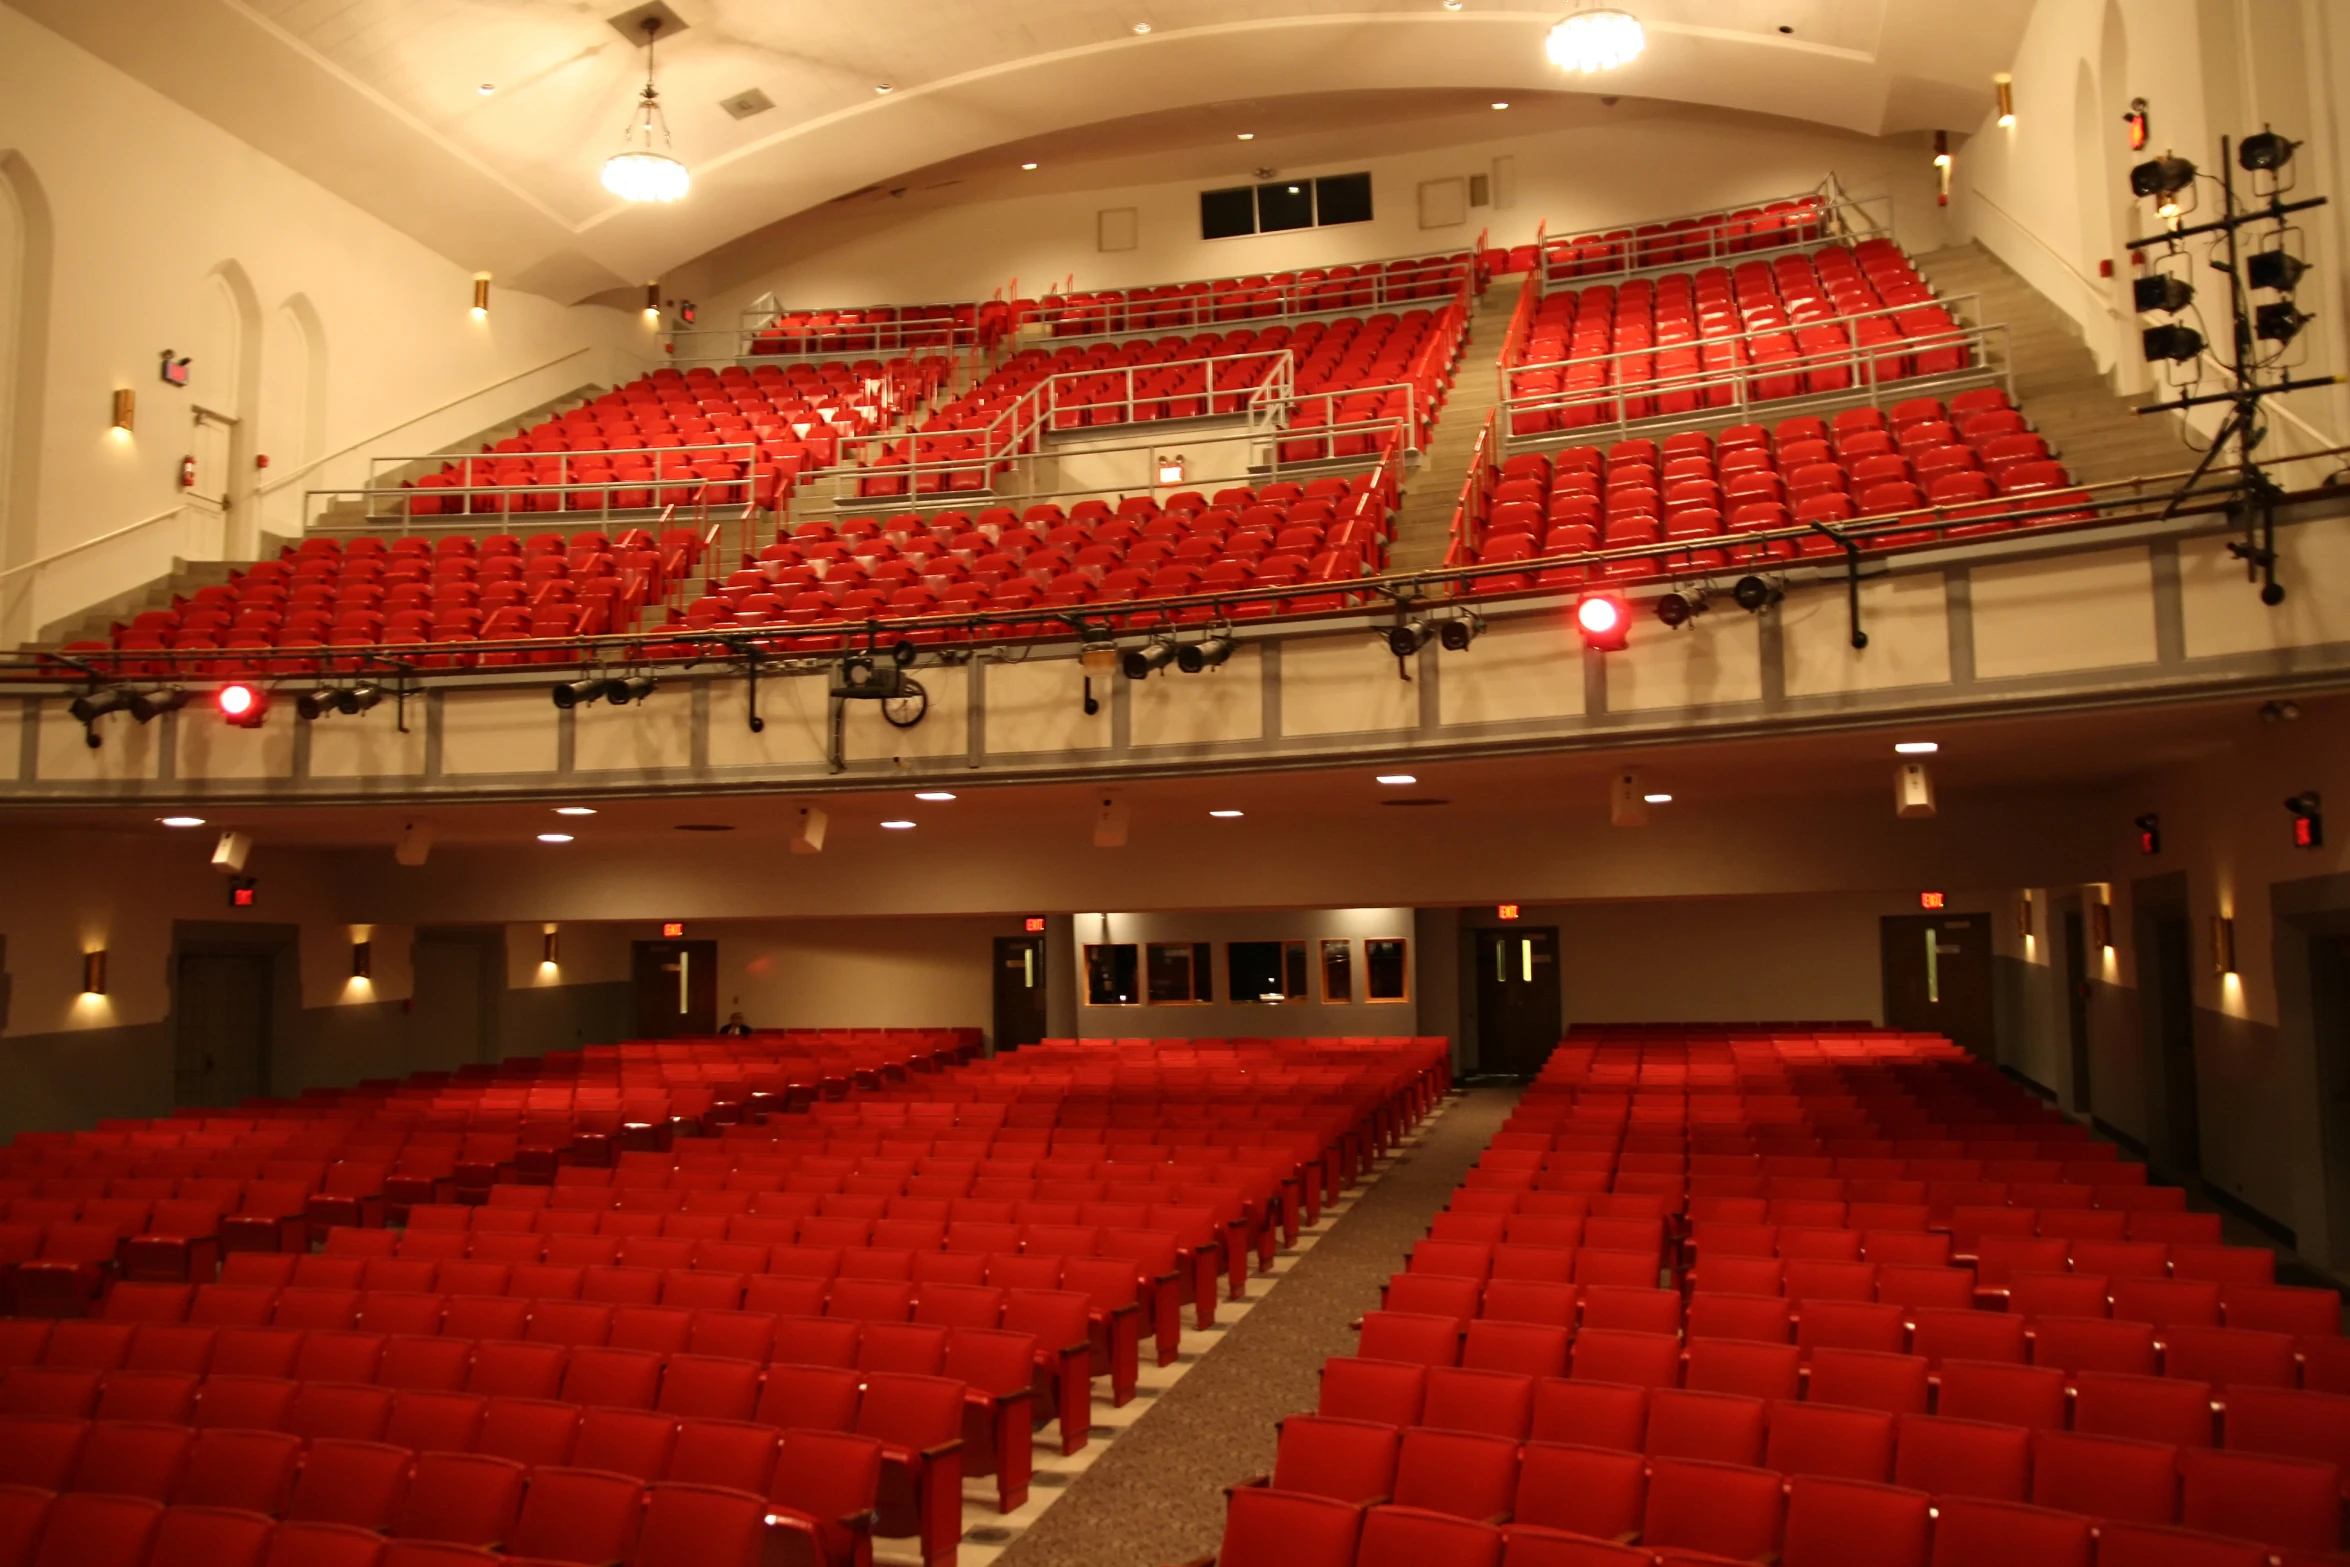 the auditorium is empty, with red chairs